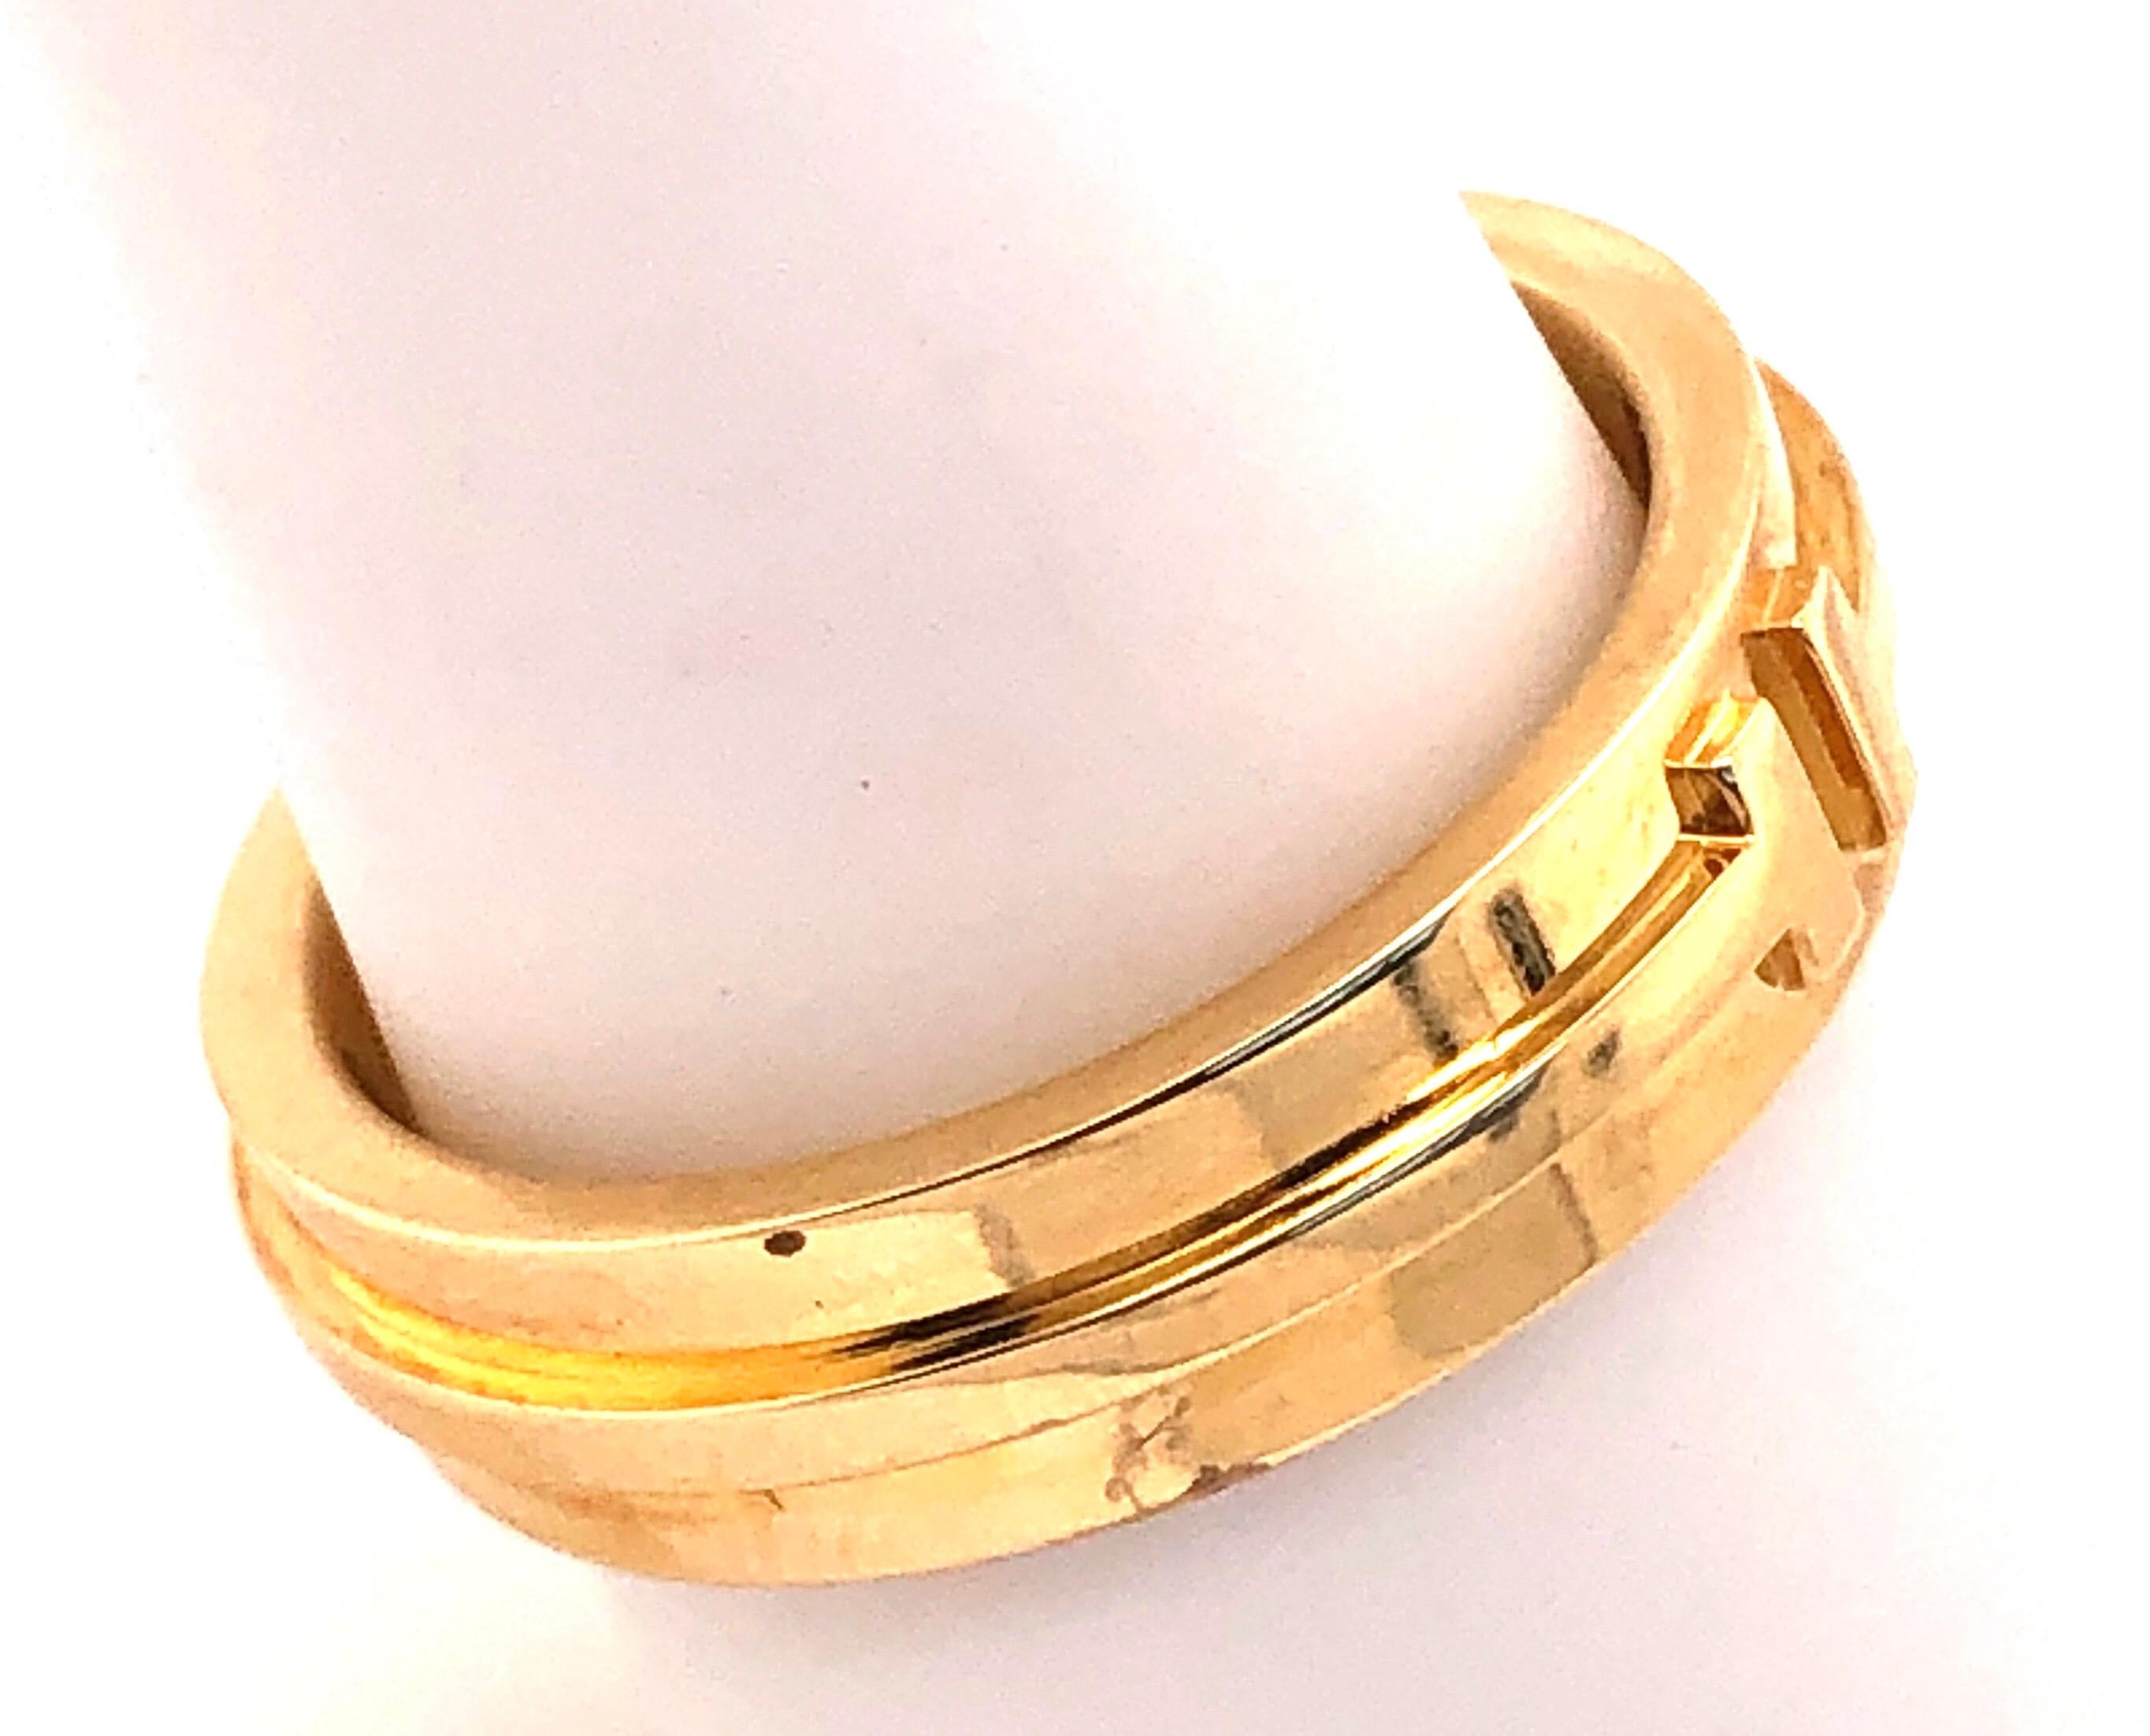 Tiffany & Co. 18 Karat Yellow Gold Wedding Ring / Band In Good Condition For Sale In Stamford, CT